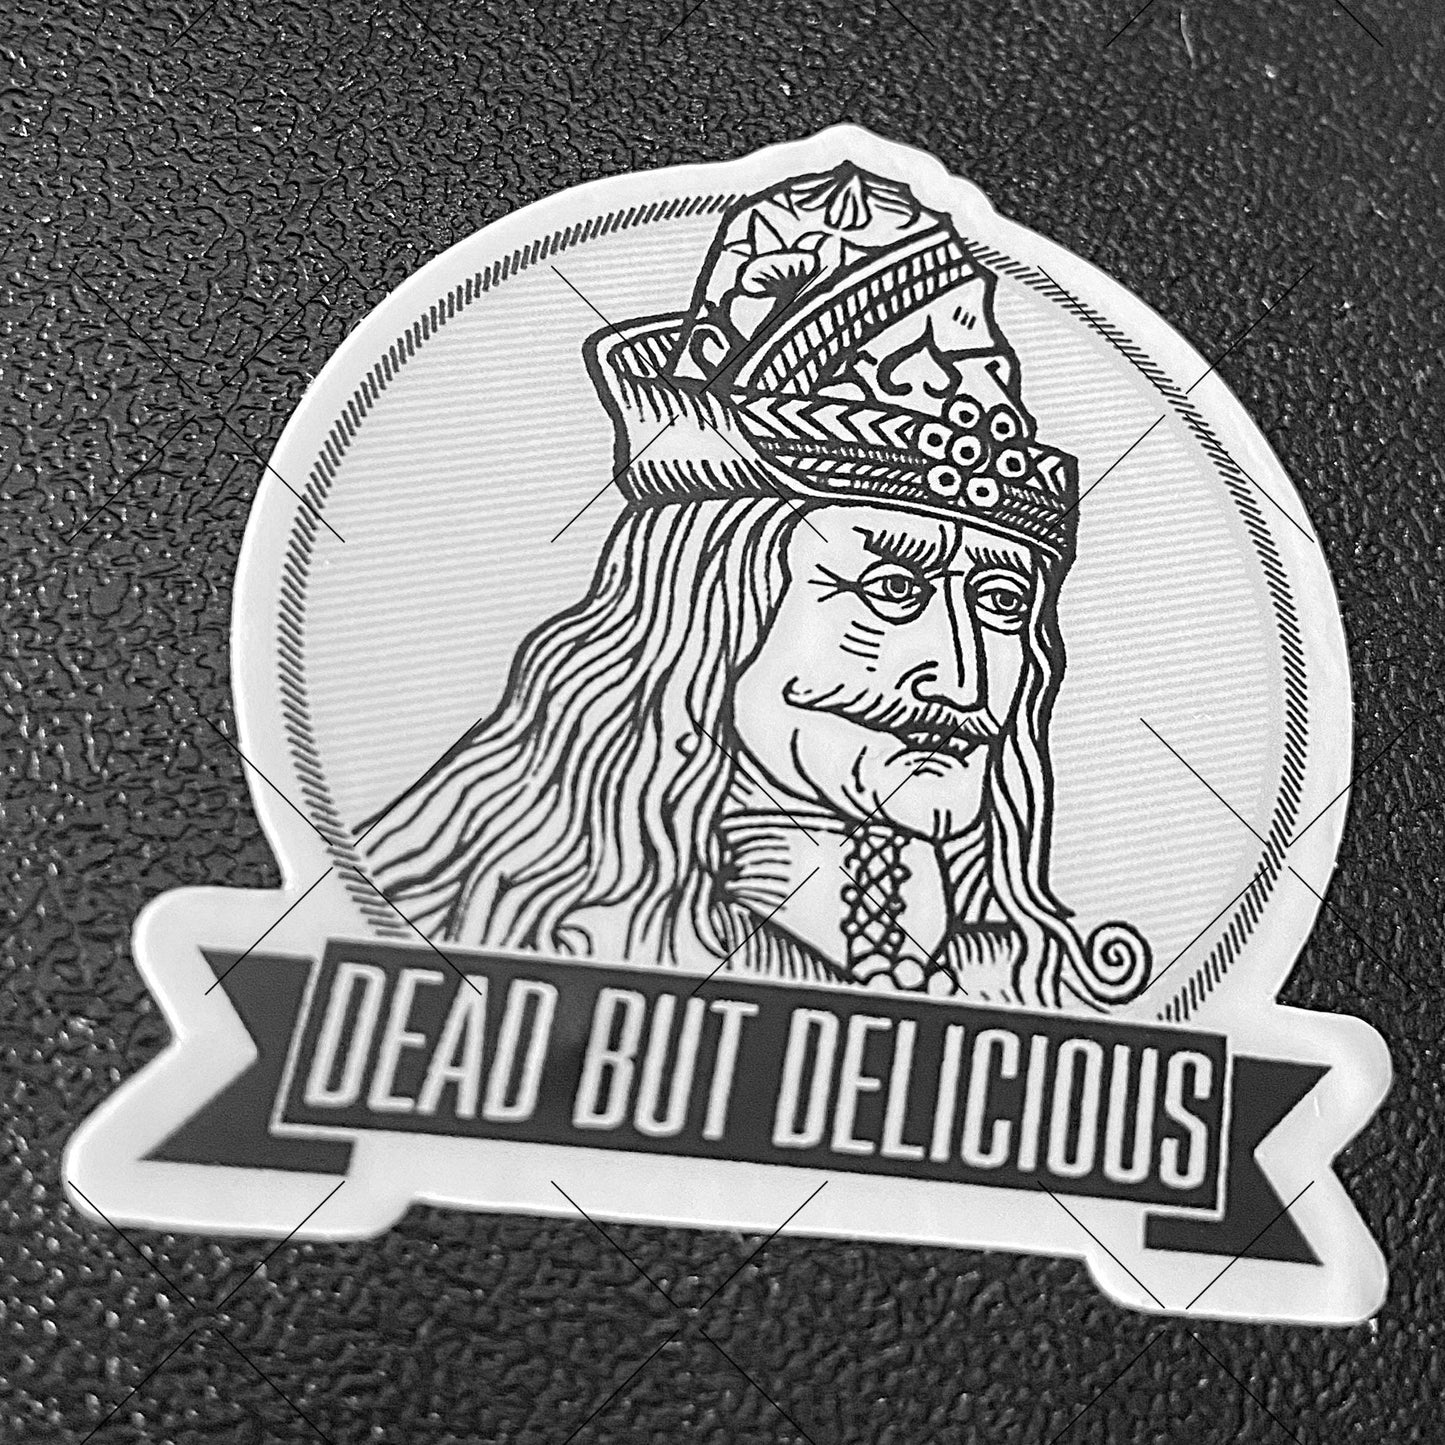 What We Do in the Shadows, "Dead But Delicious" sticker